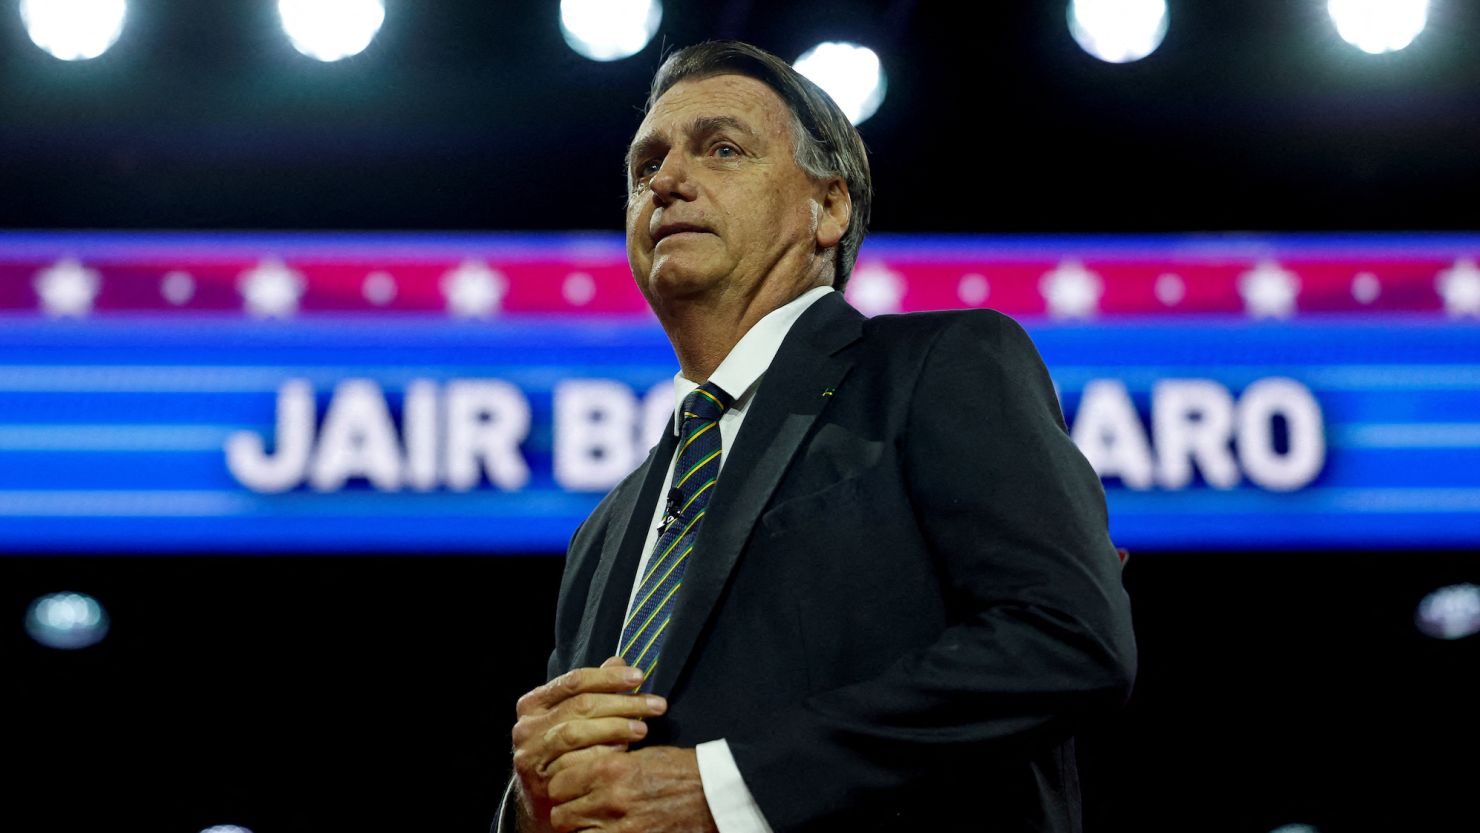 Former President of Brazil Jair Bolsonaro speaks at the Conservative Political Action Conference in Maryland on March 4, 2023.